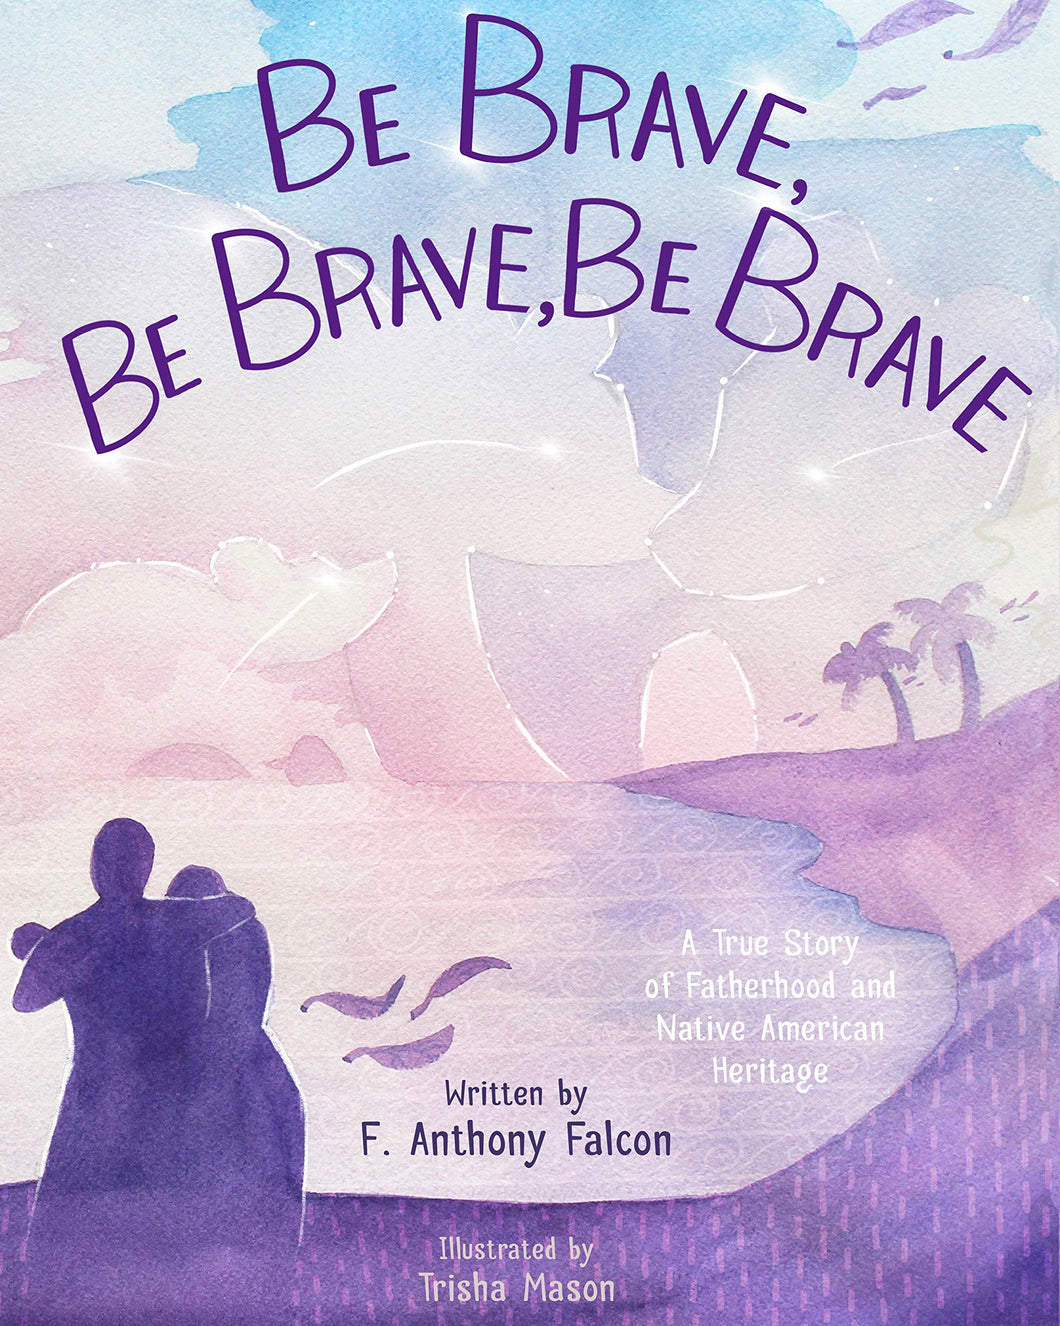 Be Brave, Be Brave, Be Brave: A True Story of Fatherhood and Native American Heritage [F. Anthony Falcon]